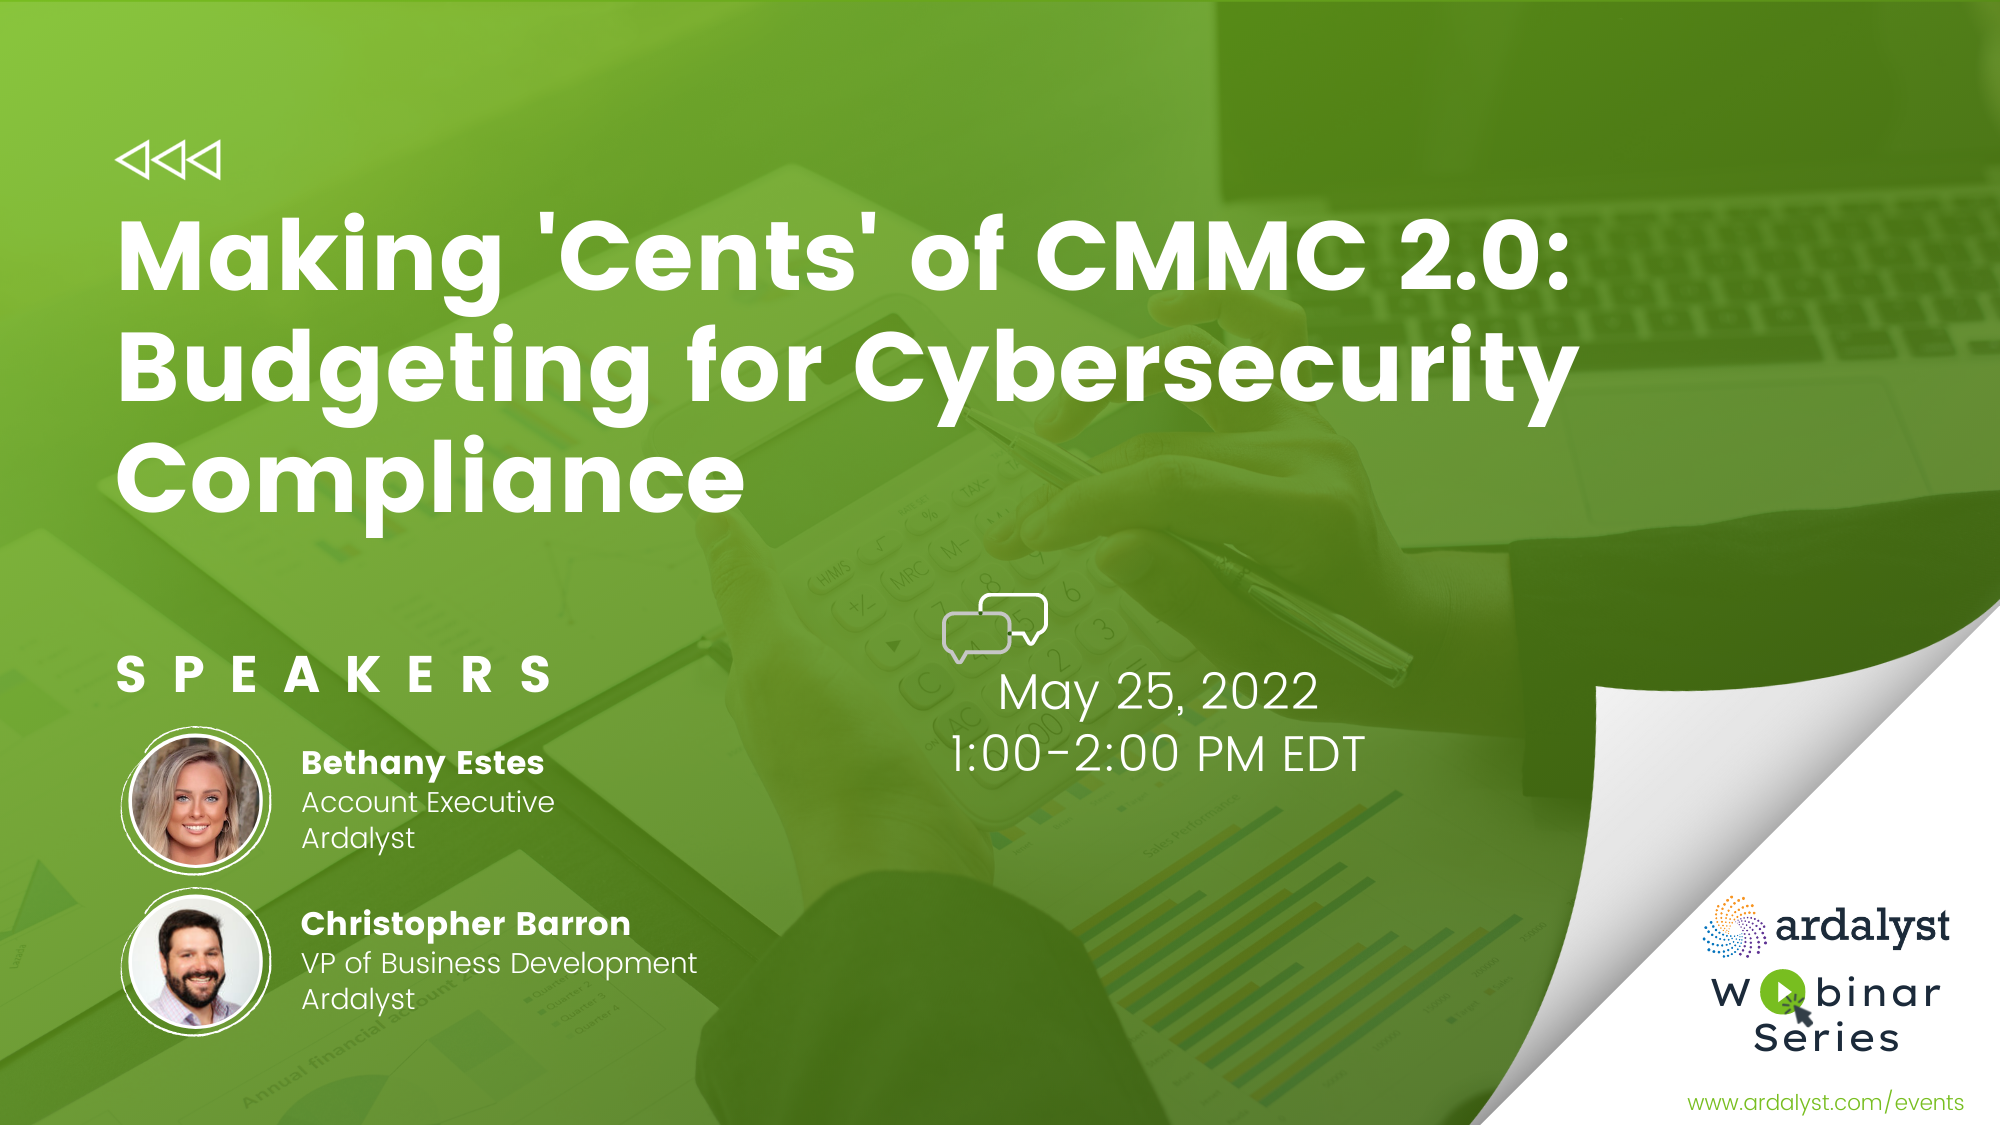 Making Cents of CMMC 2.0 Budgeting for Cybersecurity Compliance